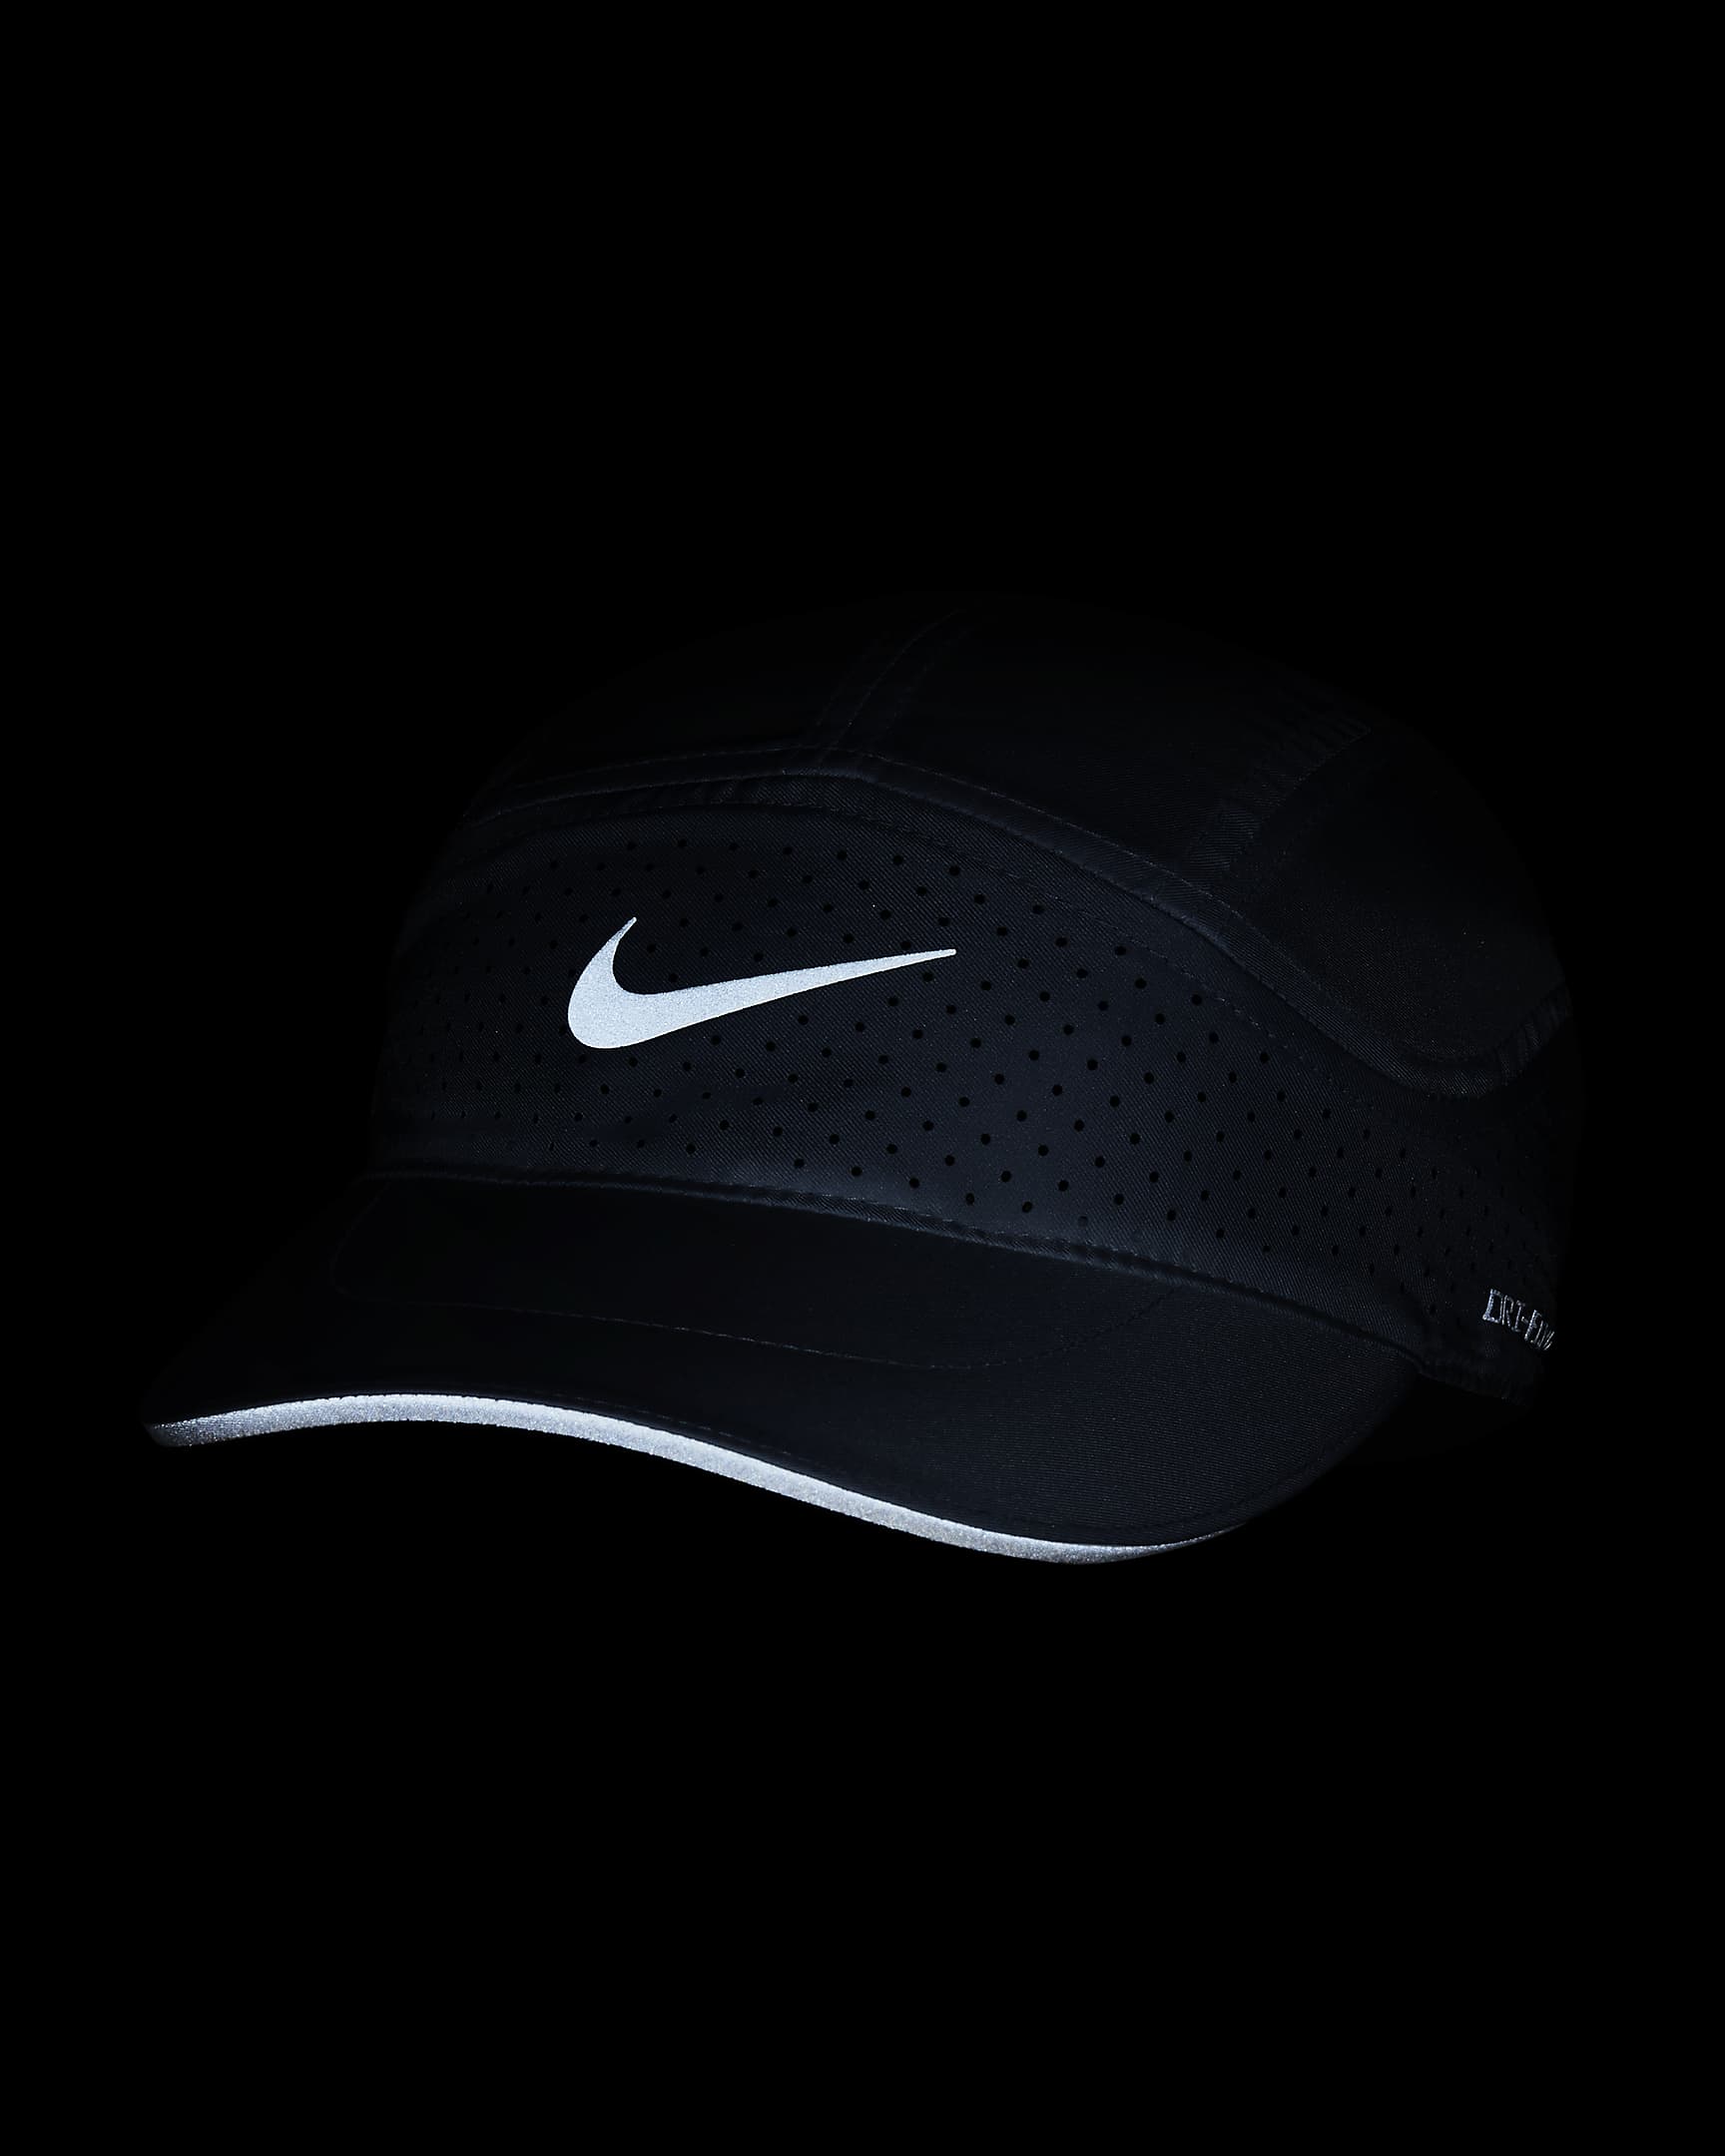 Nike Dri-FIT ADV Fly Unstructured Reflective Design Cap. Nike SI